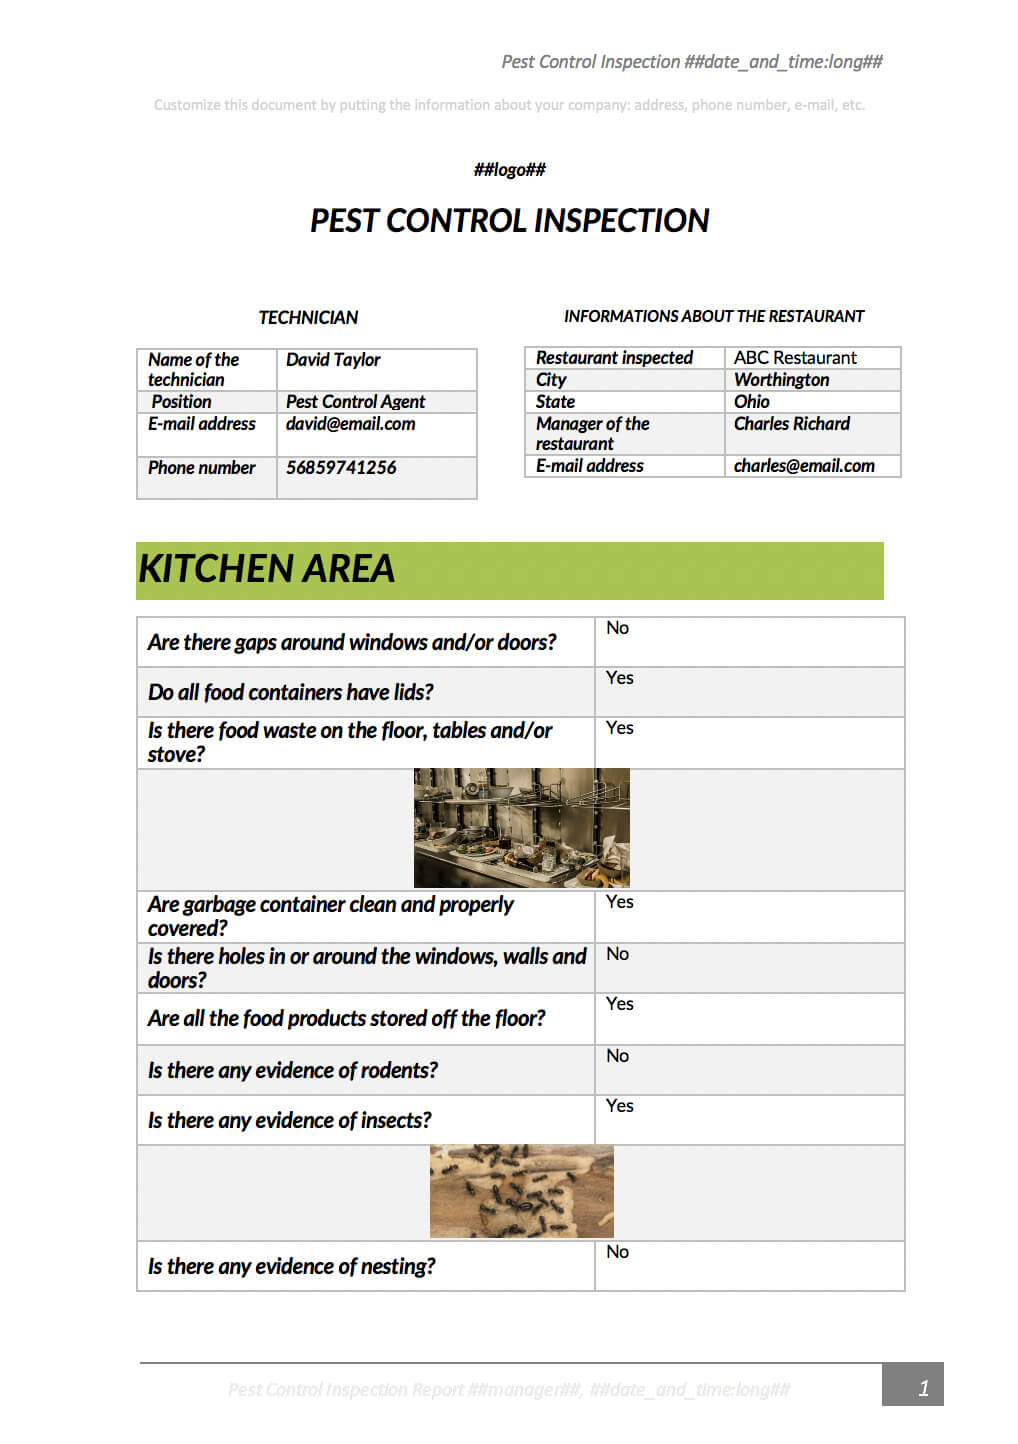 Pest Control Inspection With Kizeo Forms From Your Cellphone Pertaining To Pest Control Inspection Report Template